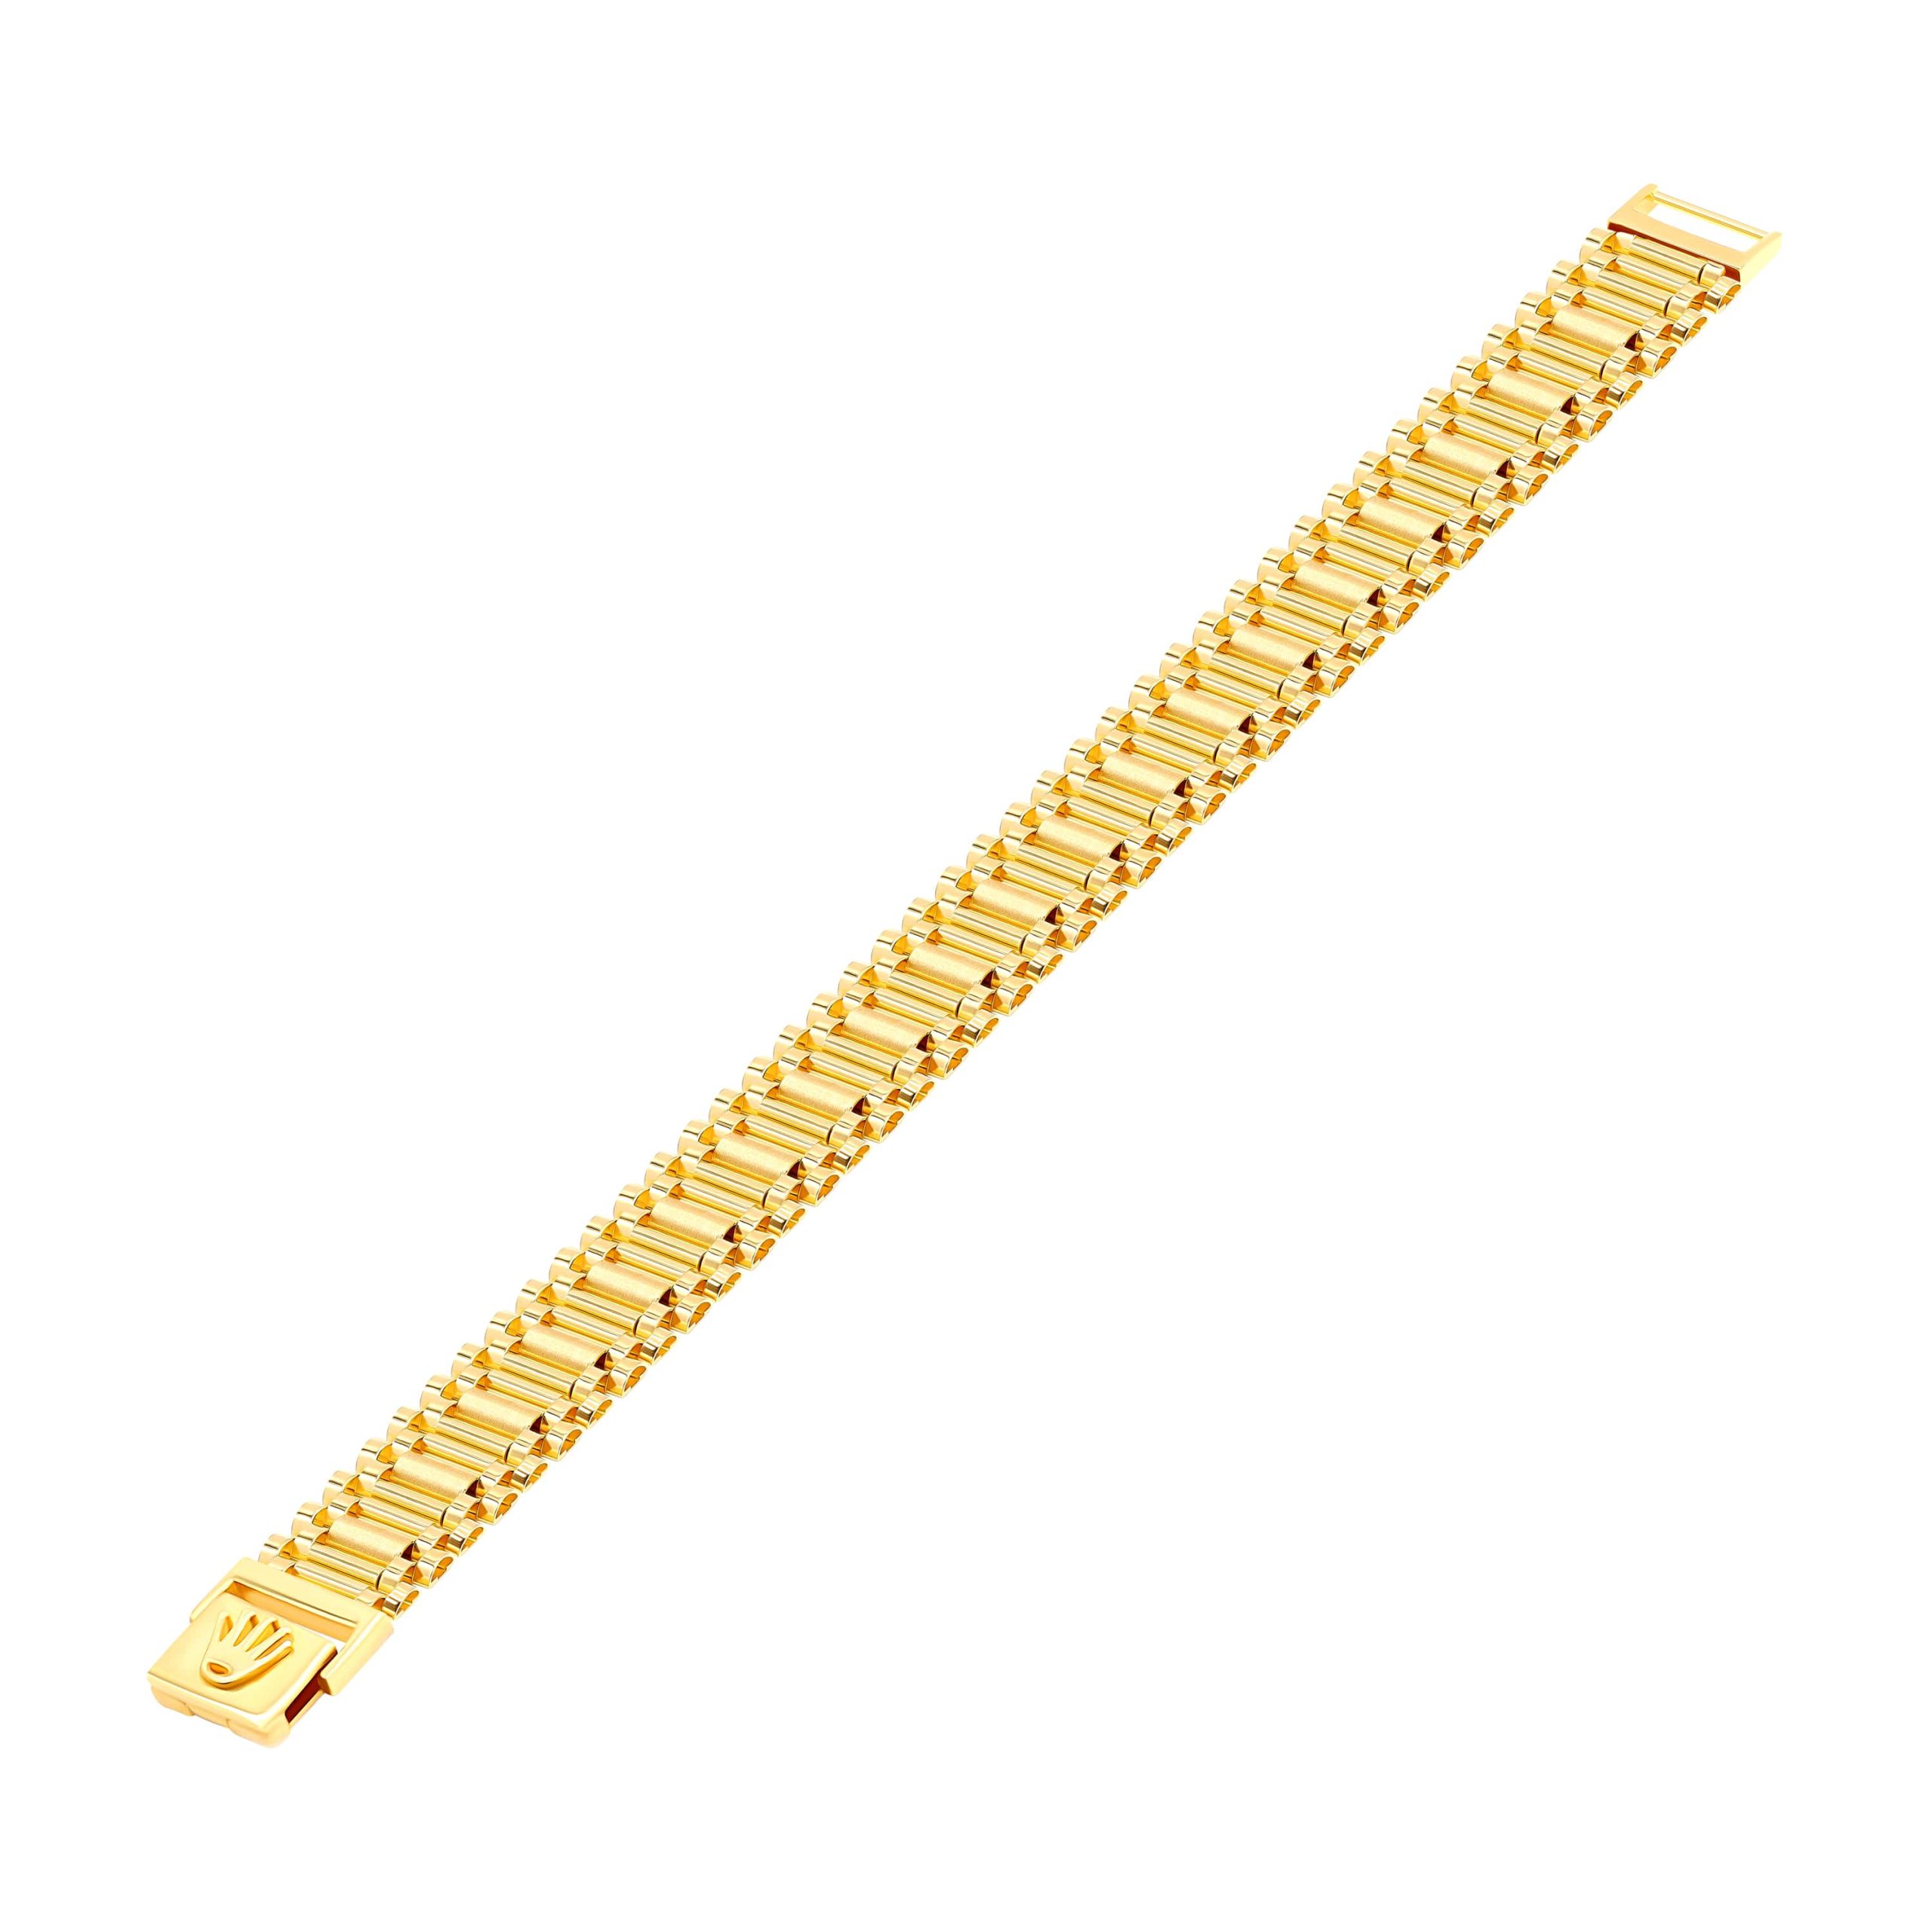 24K Gold Plated Unisex Rolex Chain Design Bracelet Cop 916 | Shopee Malaysia-sonthuy.vn